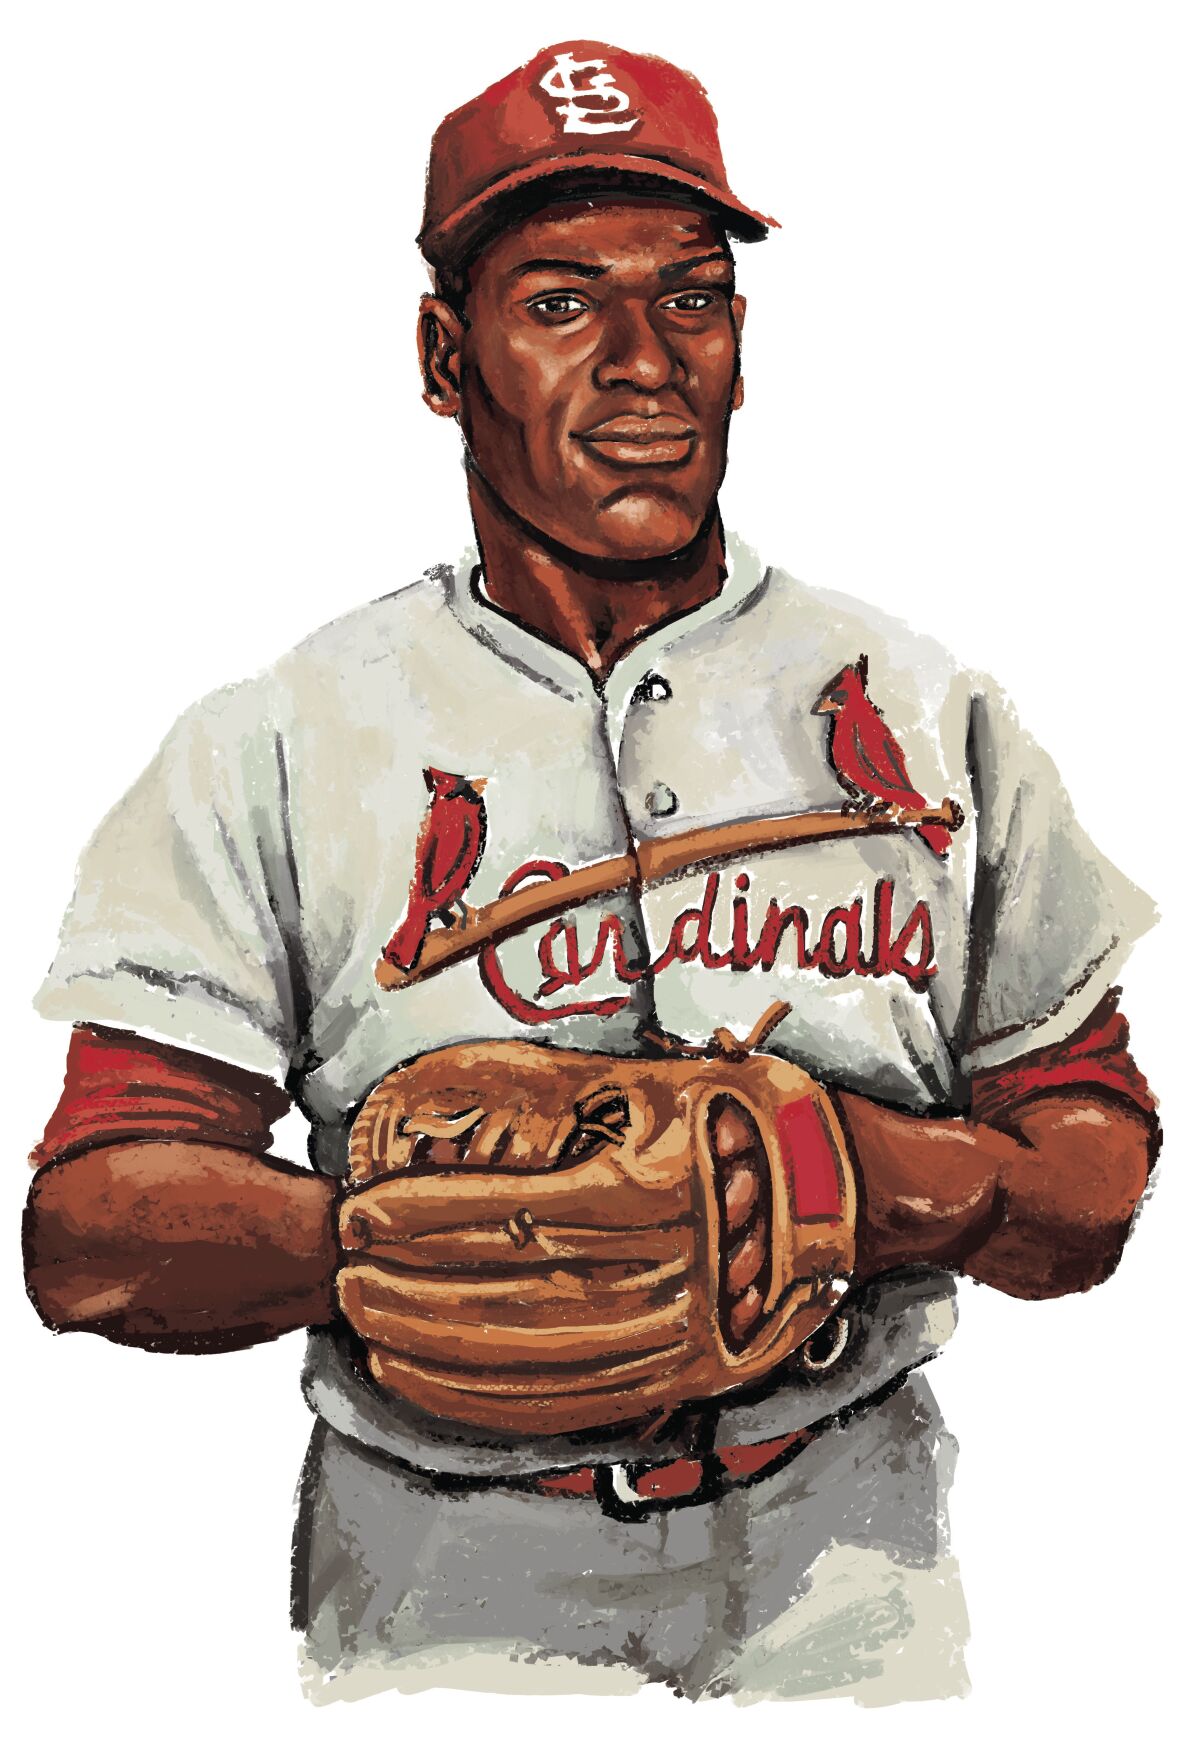 Bob Gibson, a native Omahan and one of MLB's most dominant